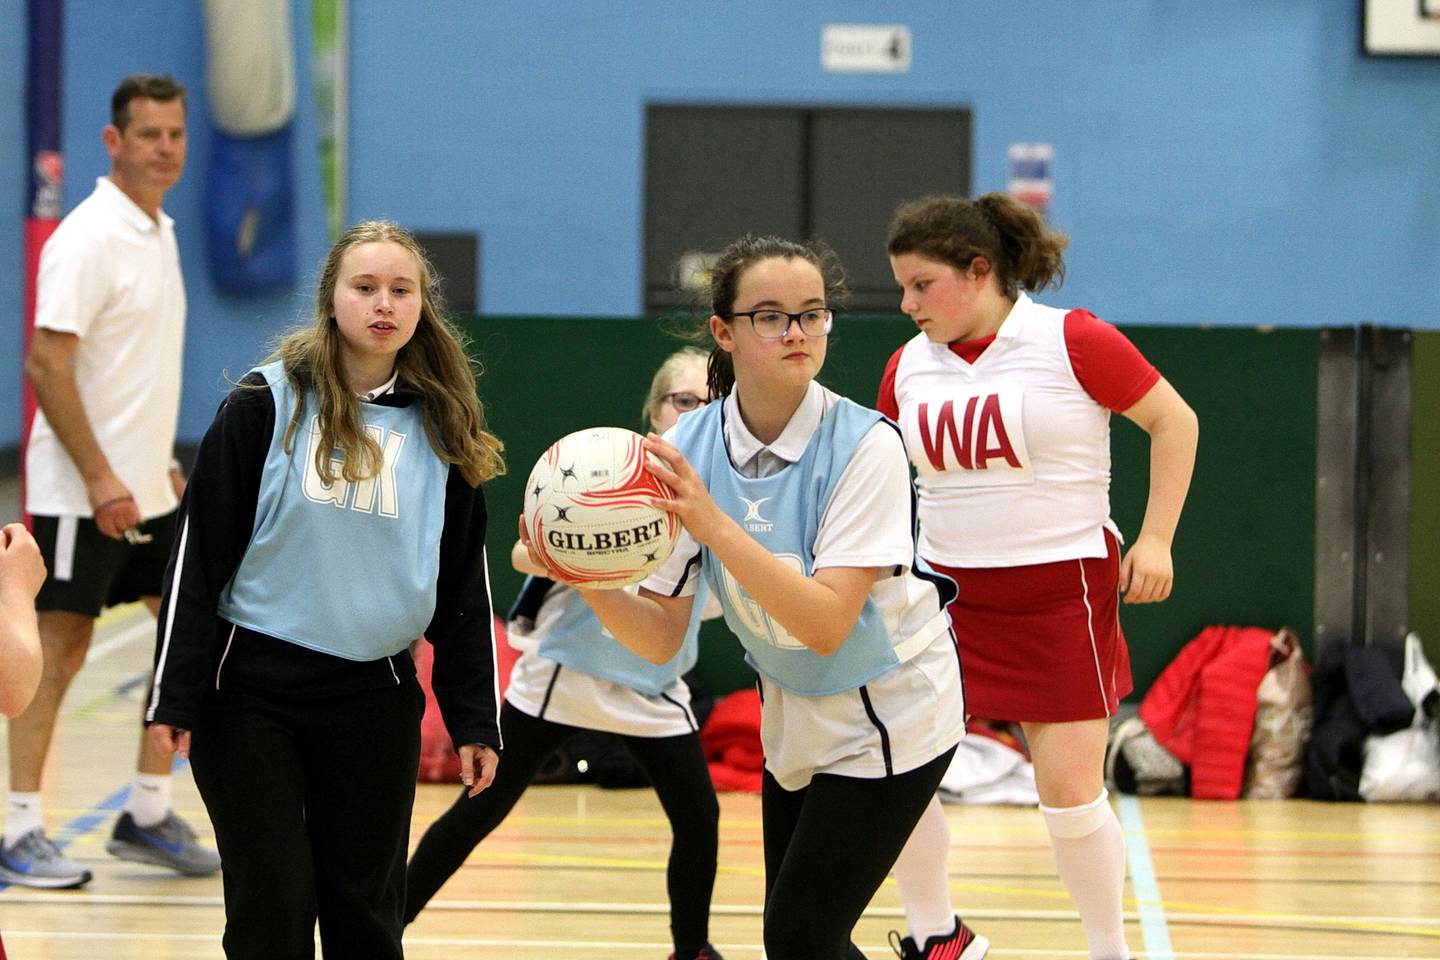 Disabled players in a game of paranetball